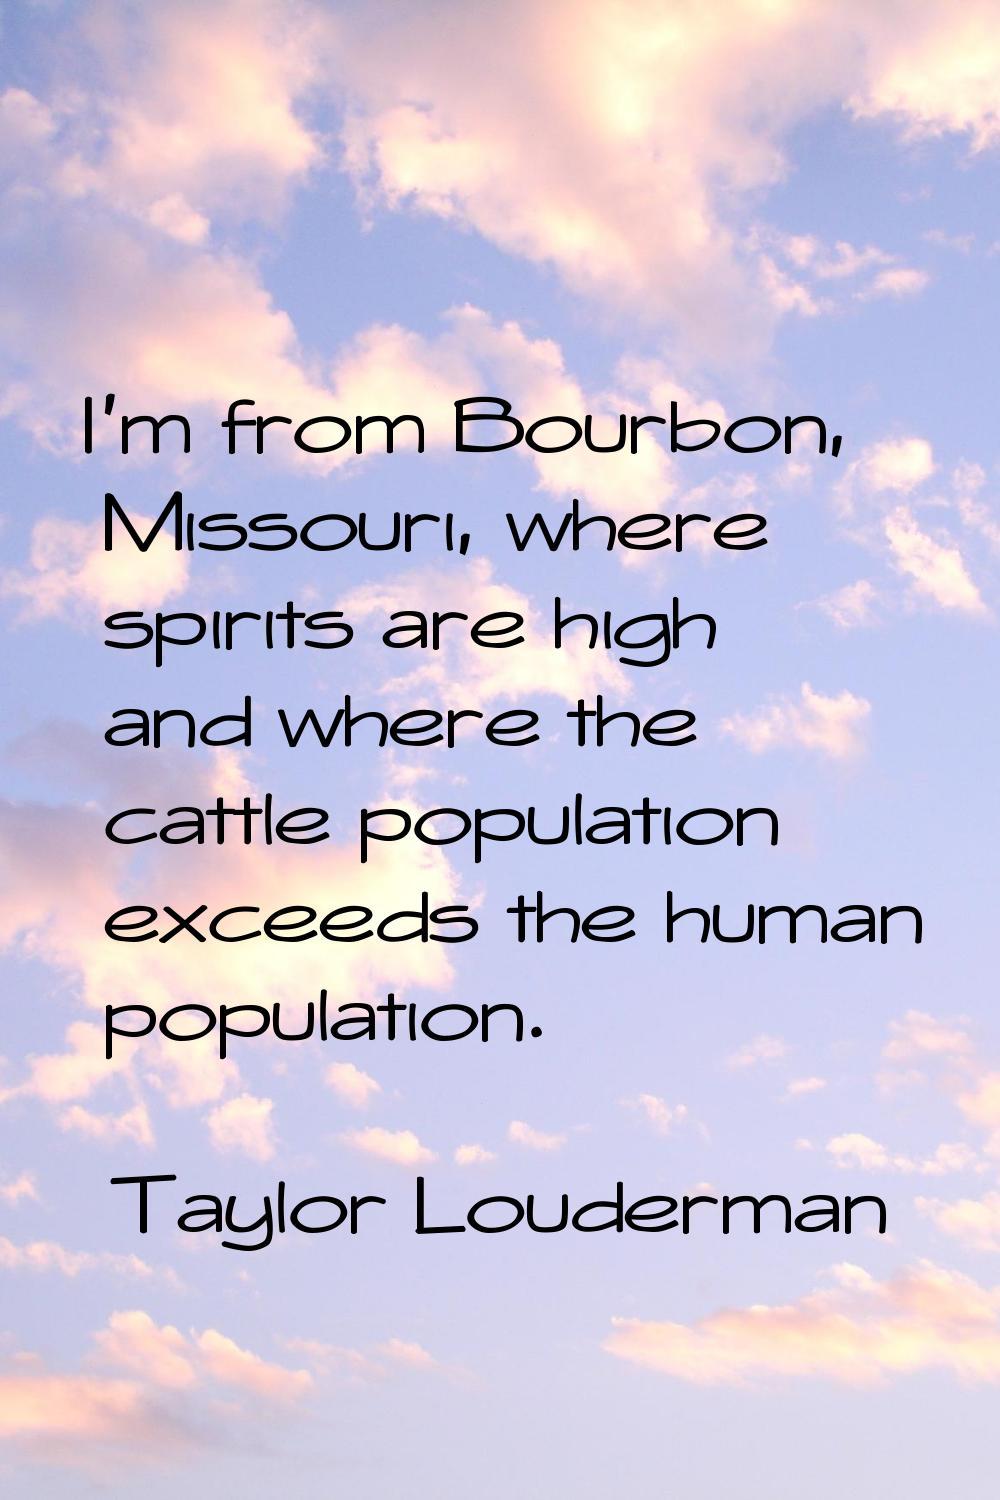 I'm from Bourbon, Missouri, where spirits are high and where the cattle population exceeds the huma